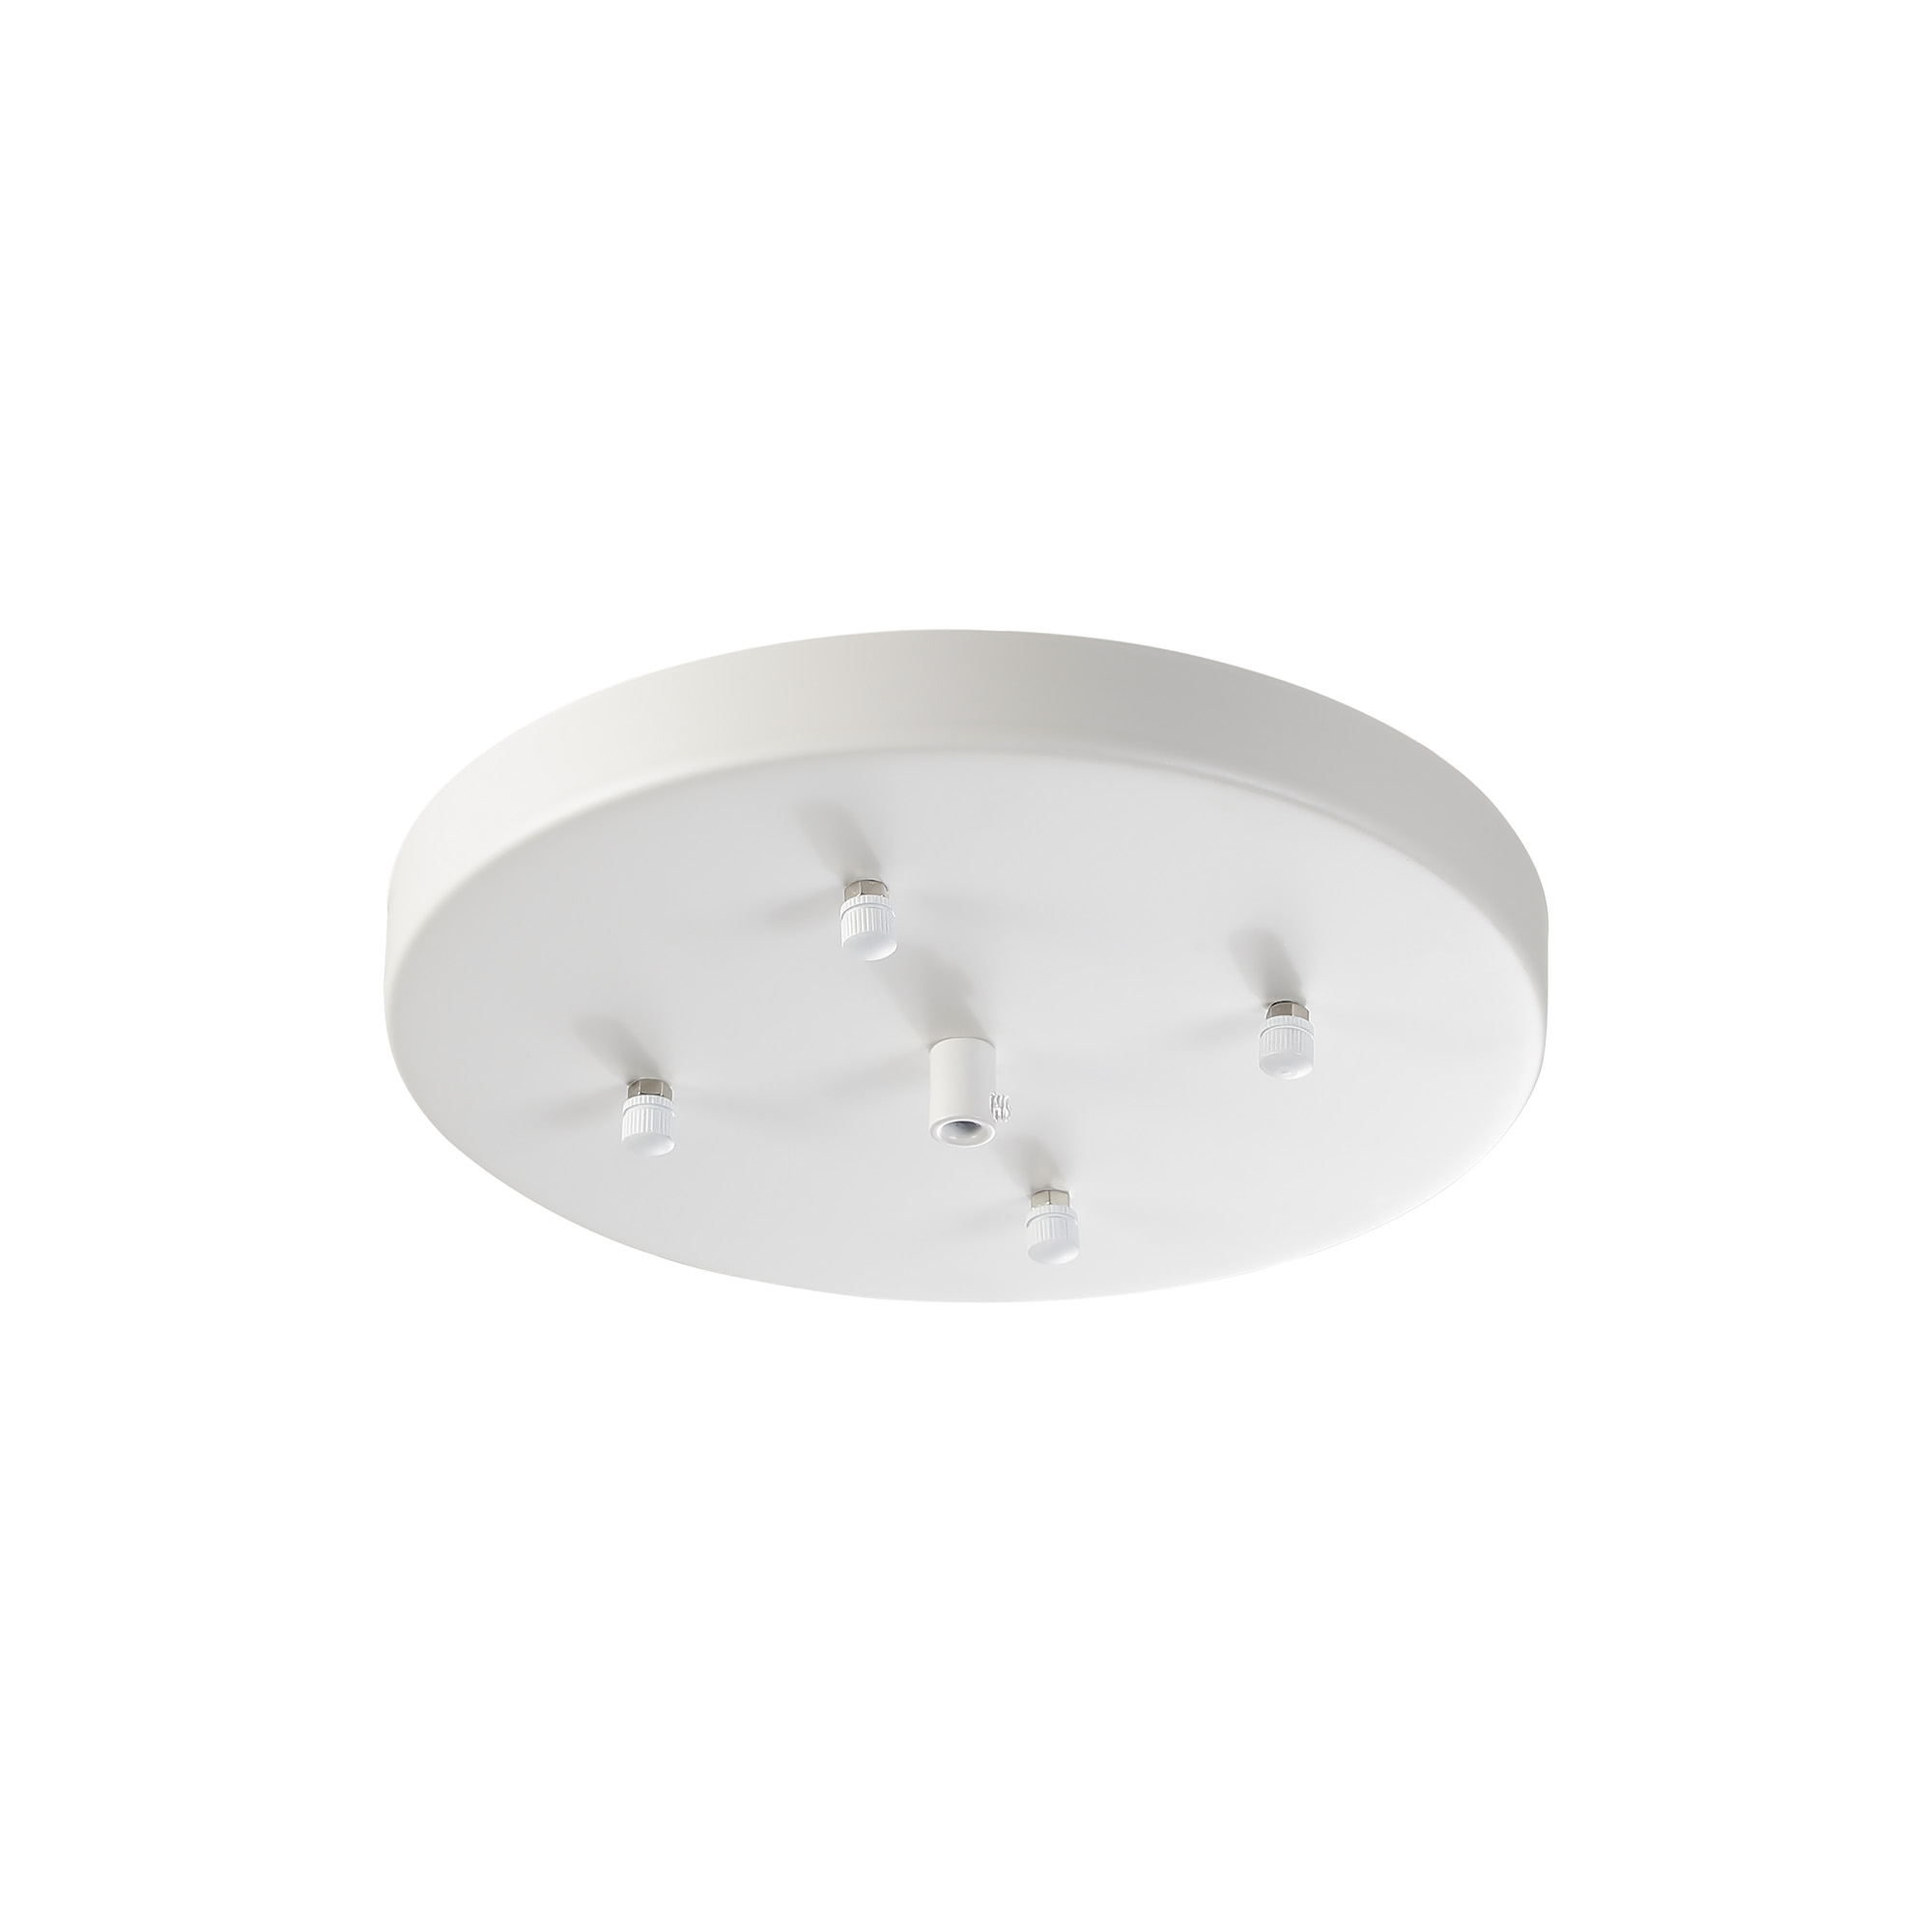 D0853WH/NH  Hayes No Hole 23cm Heavy Duty Round Ceiling Plate White